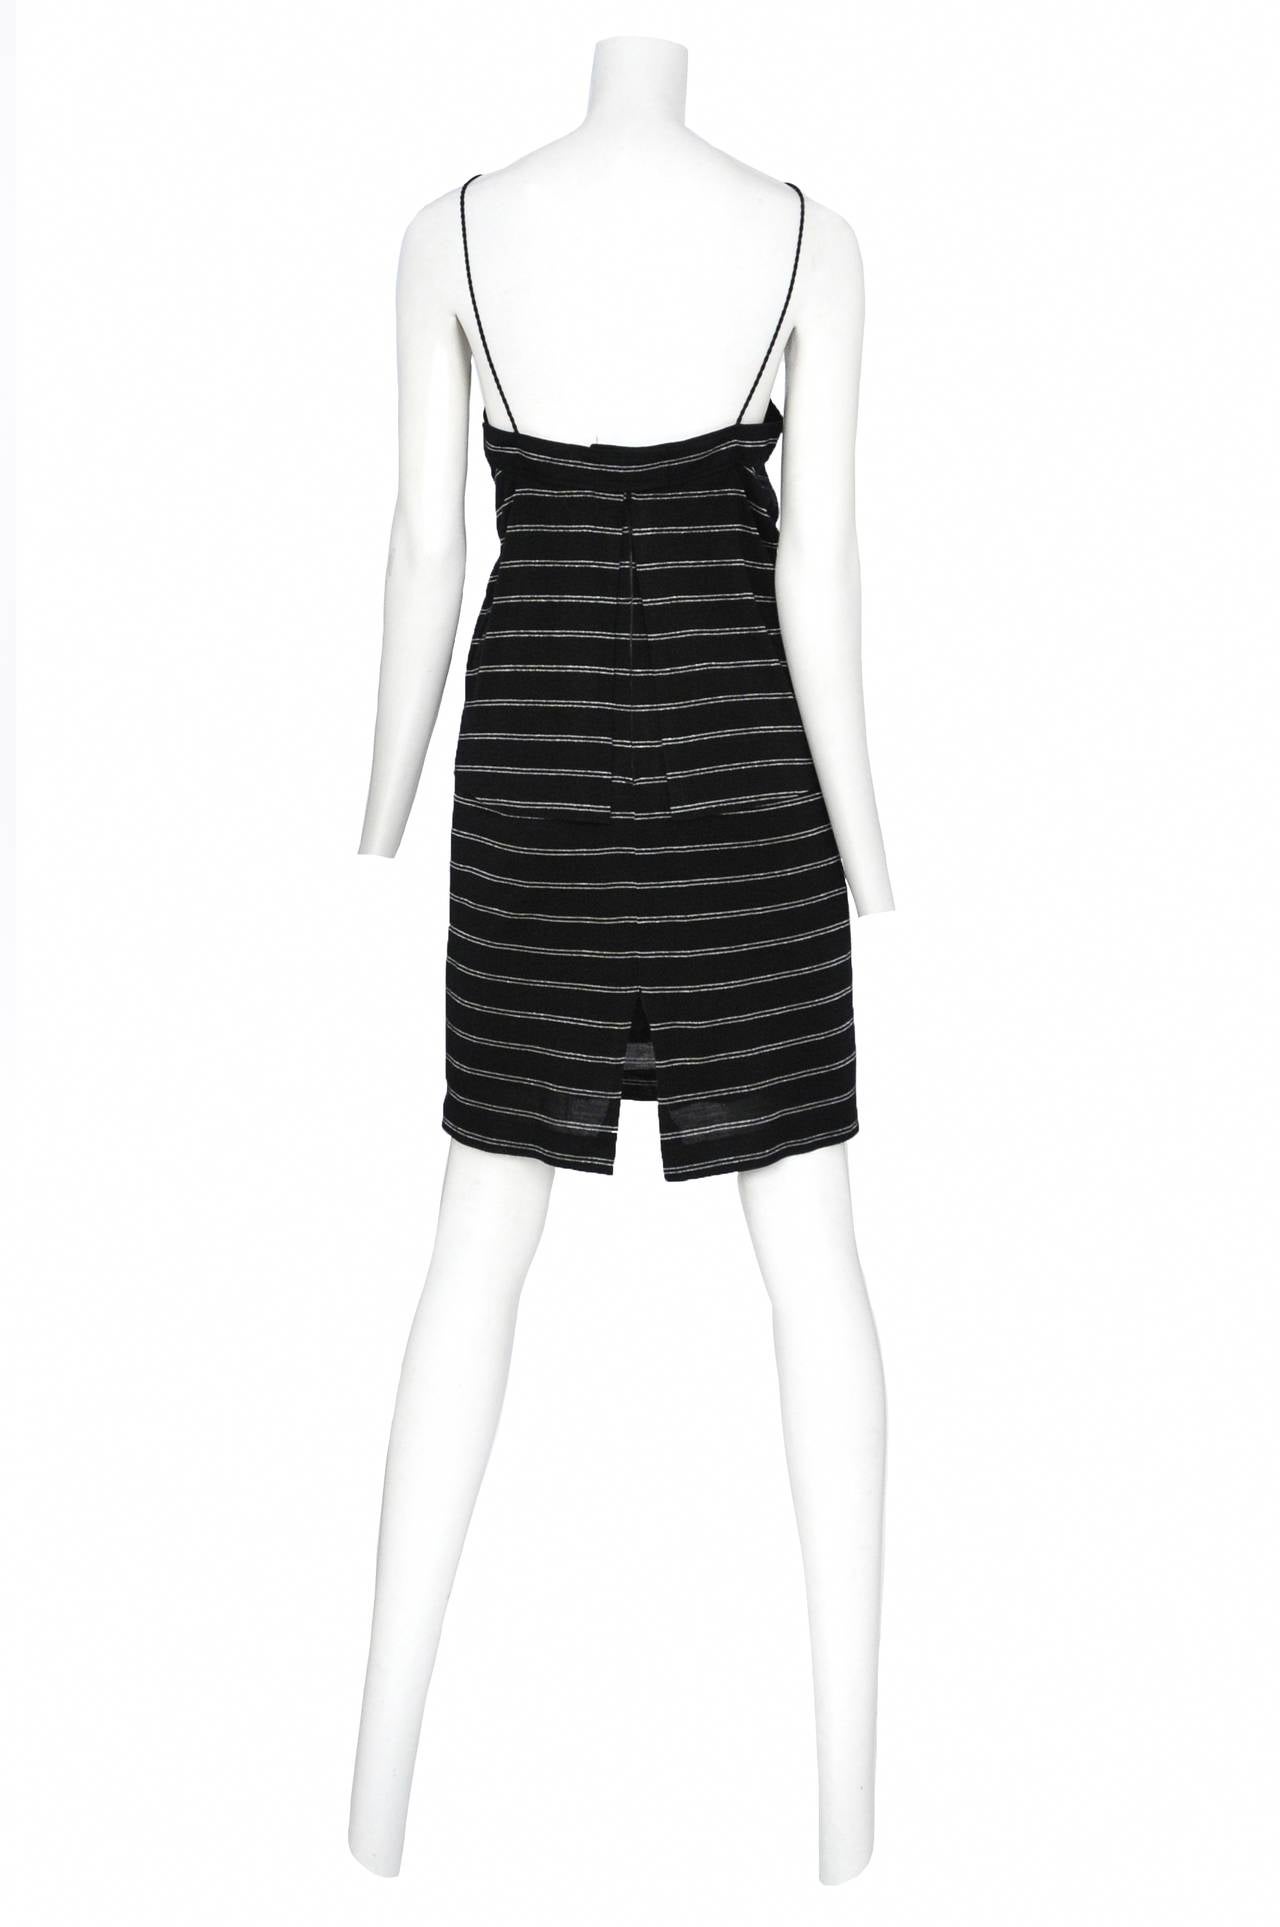 Vintage Jacques Cassia black and silver stripe knit dress featuring an architectural silver, black and silver glitter panel at the neckline held in place by black cording. Two pleated panels of the stripe fabric come out of the architectural collar